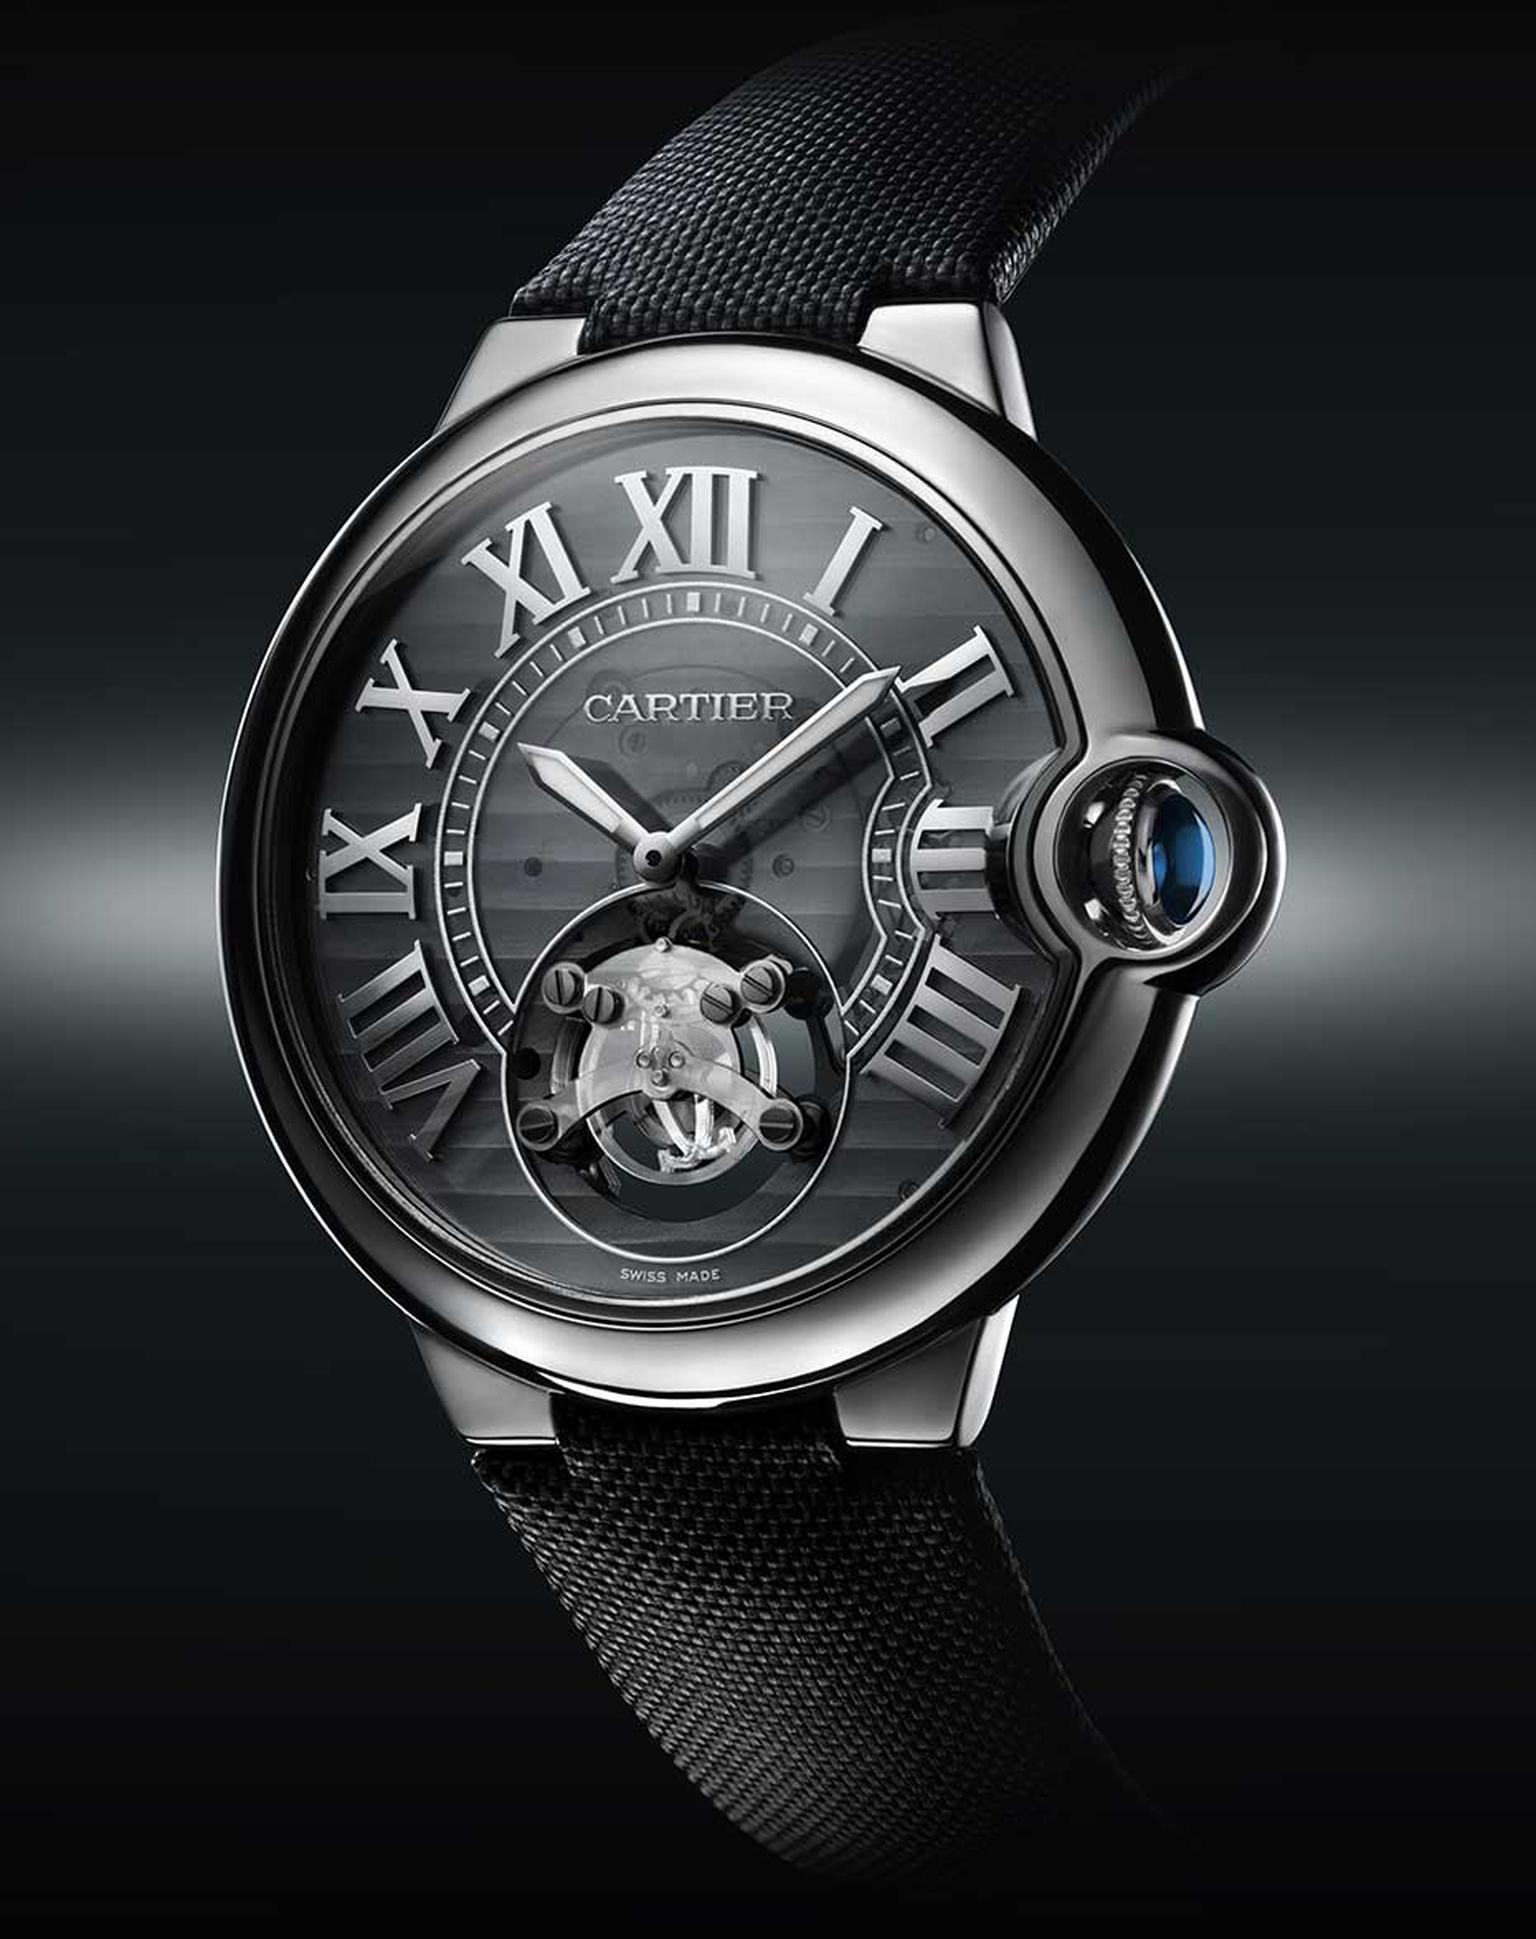 The high-tech ID One is just one of the watches Cartier is showcasing the SIAR in Madrid.